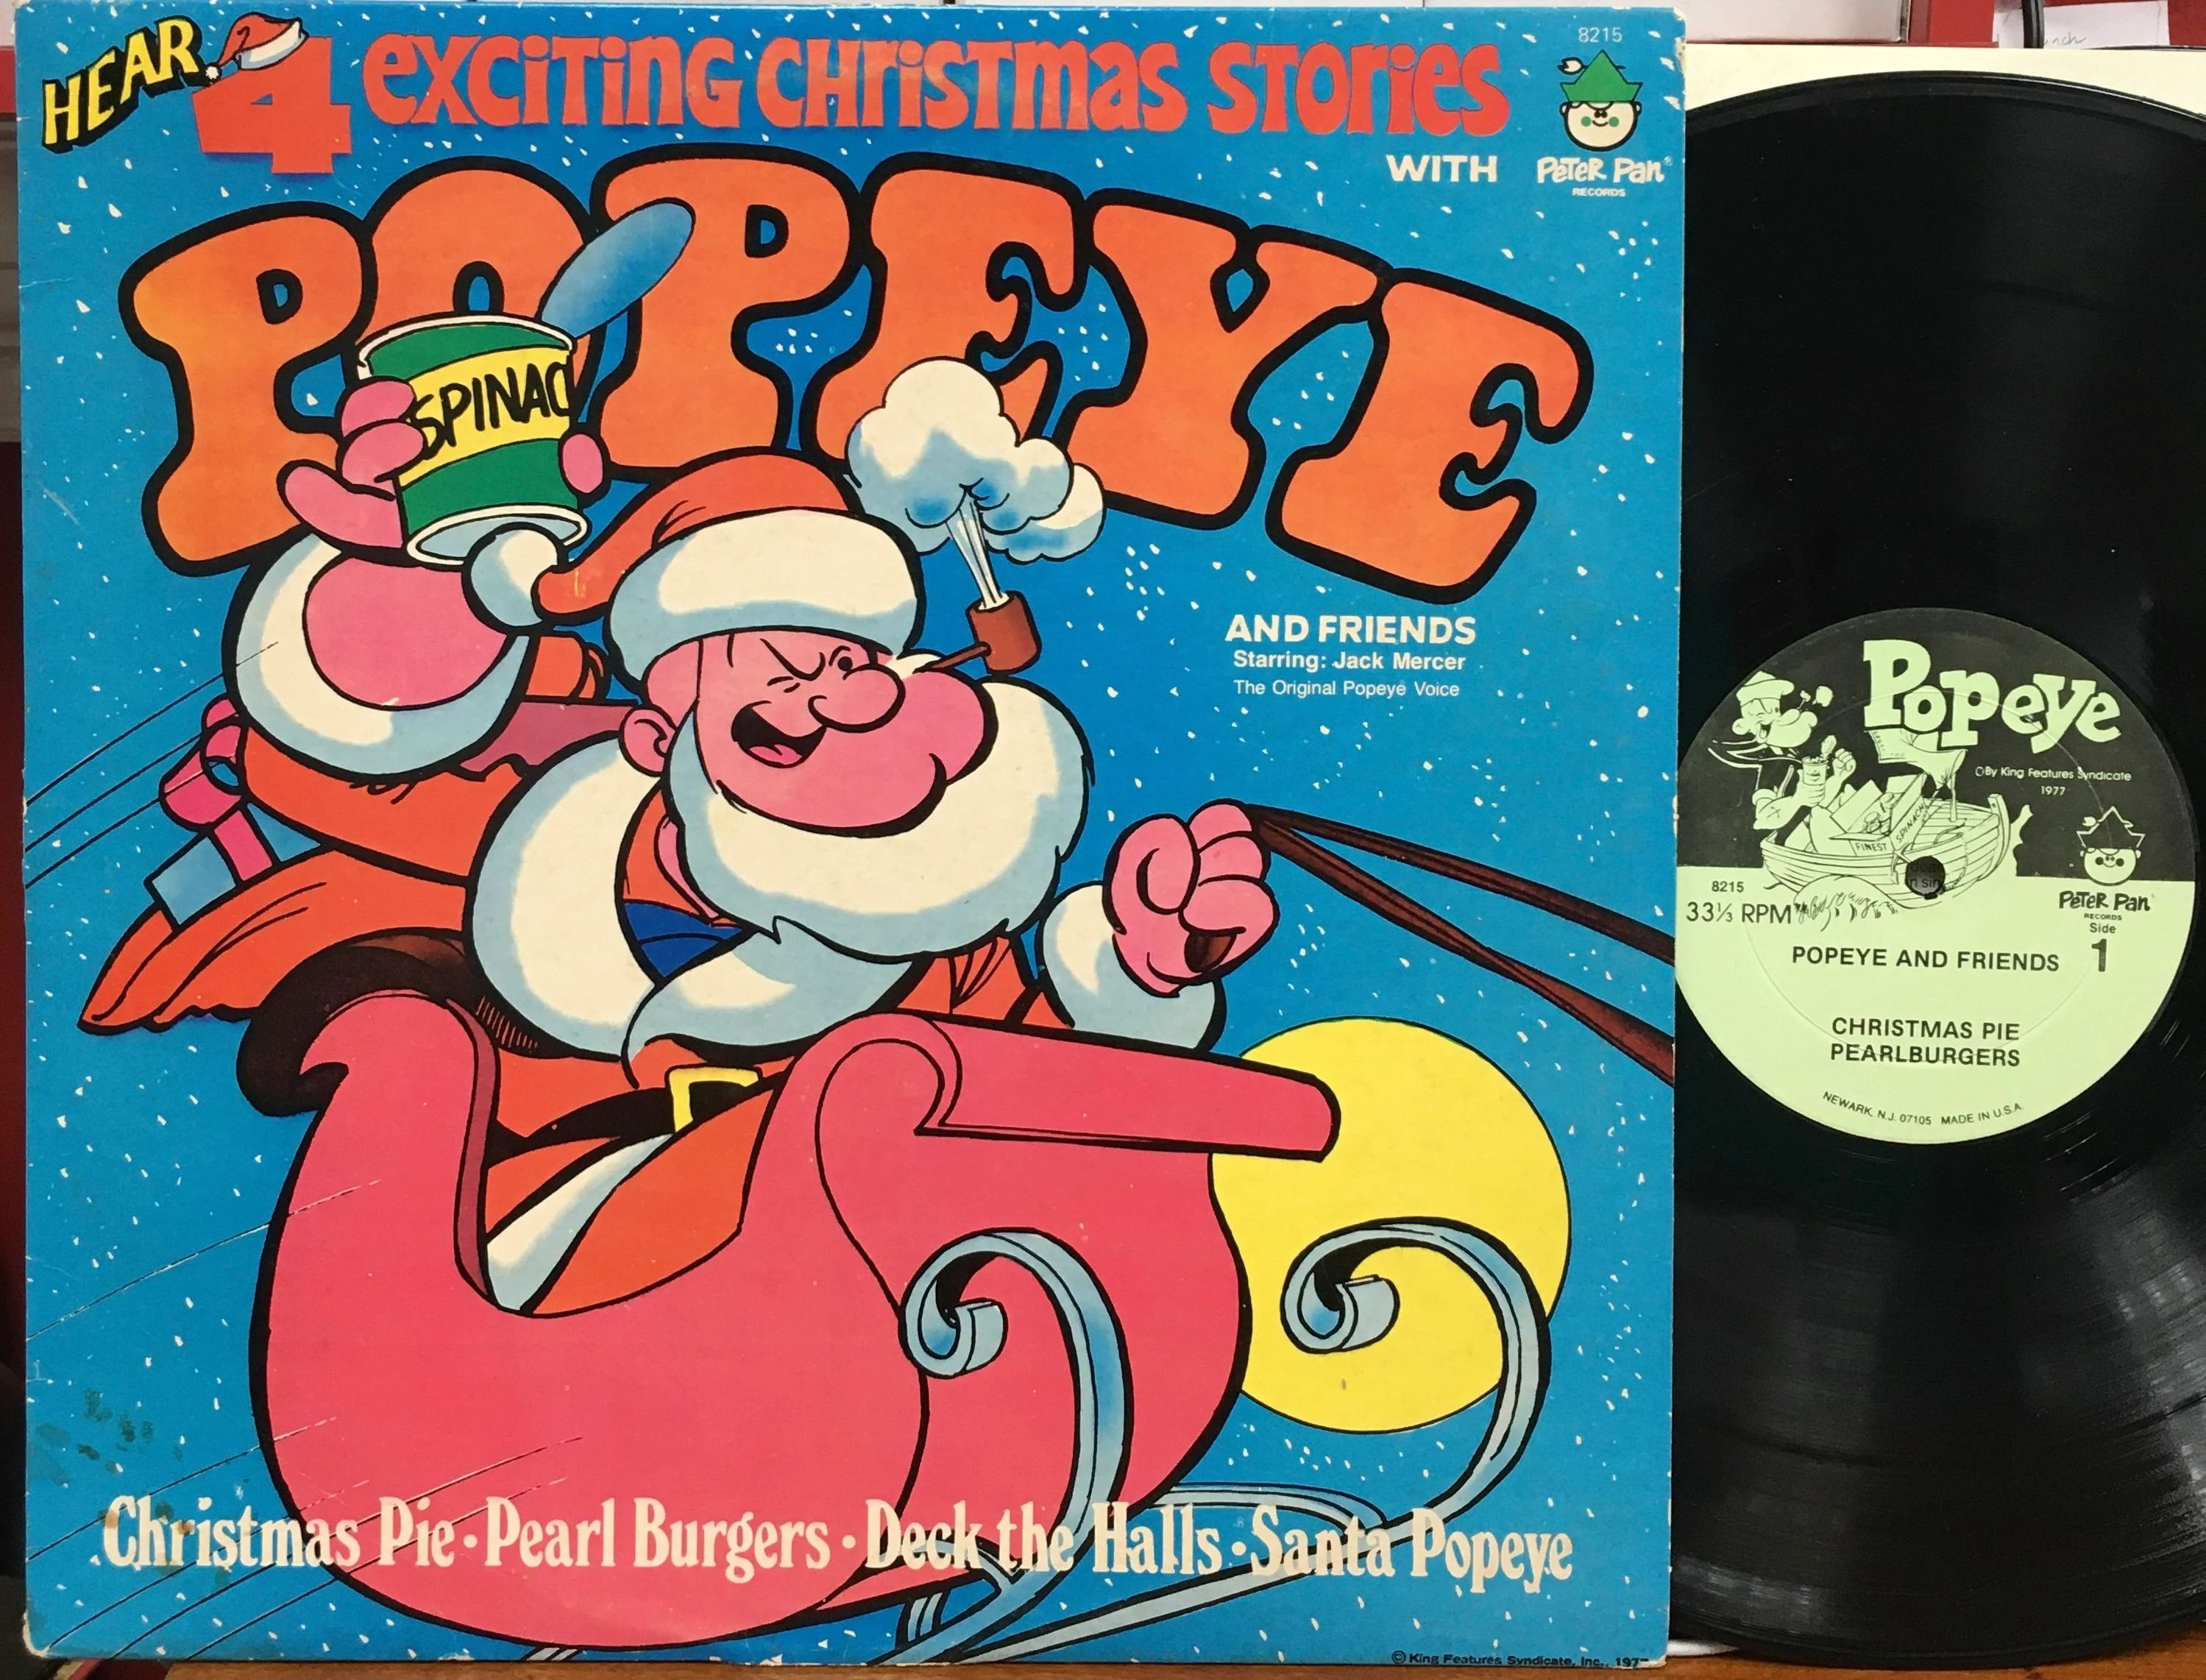 Popeye Celebrated Christmas in Cartoons, Toys, Ads...But Rarely In Comics!